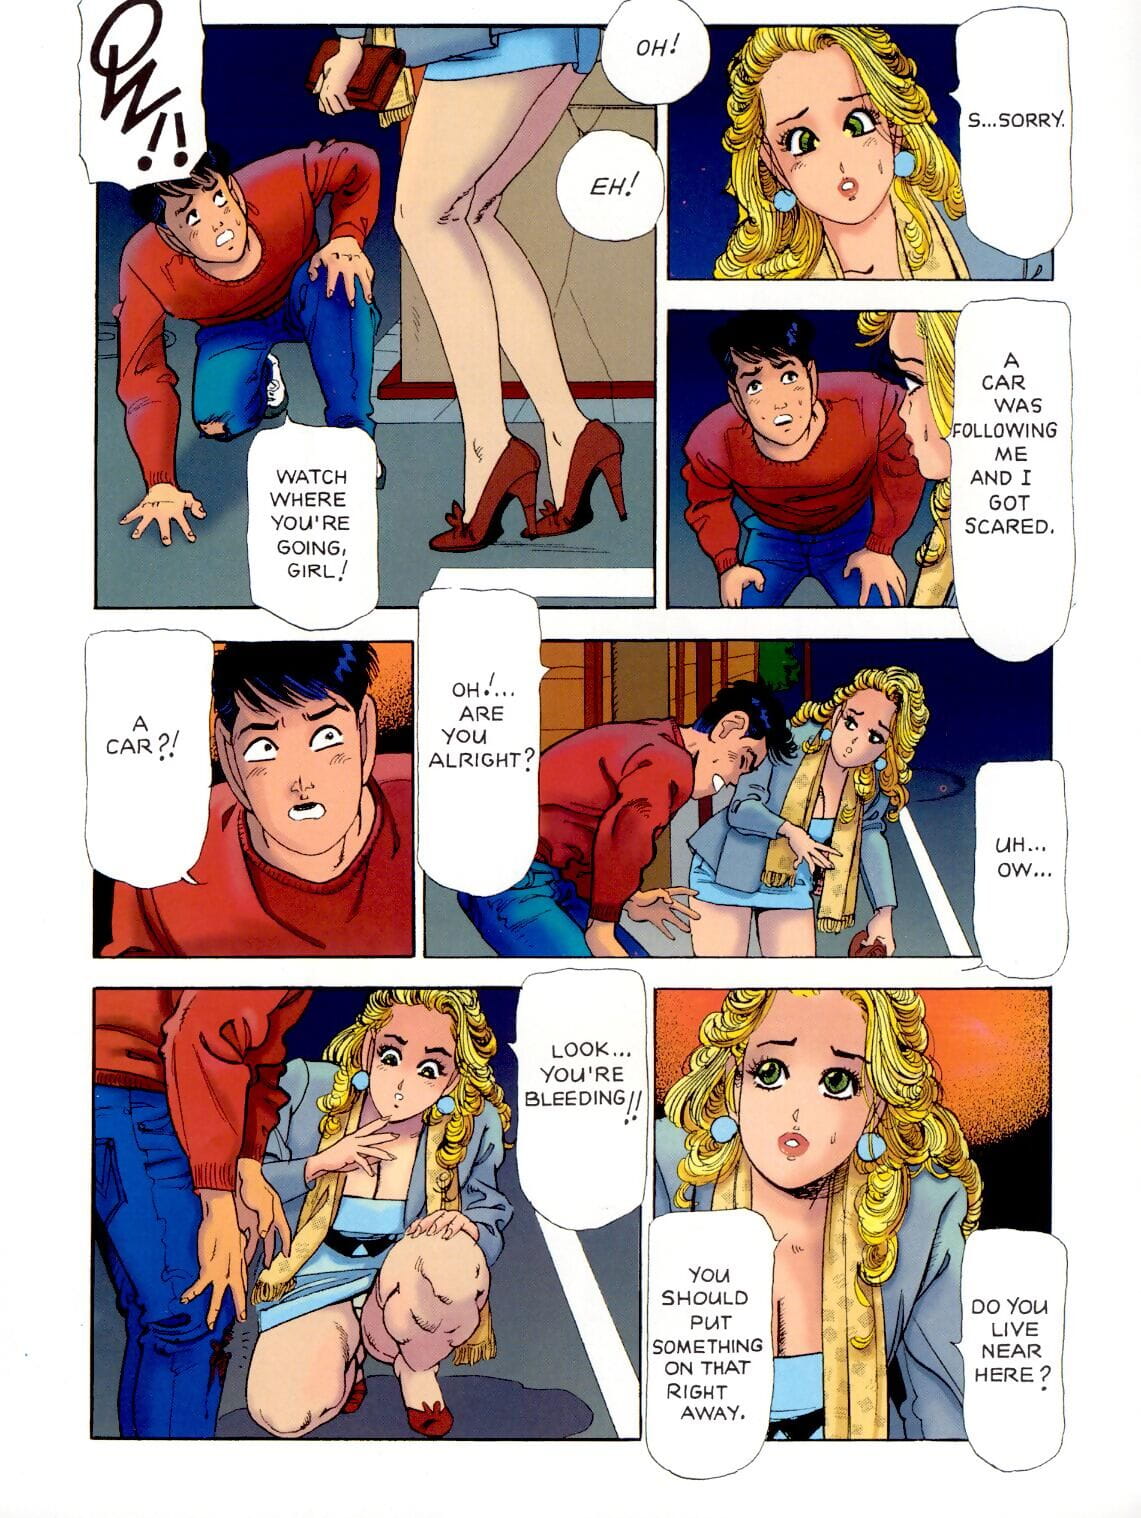 French Kiss 2 - part 3 page 1